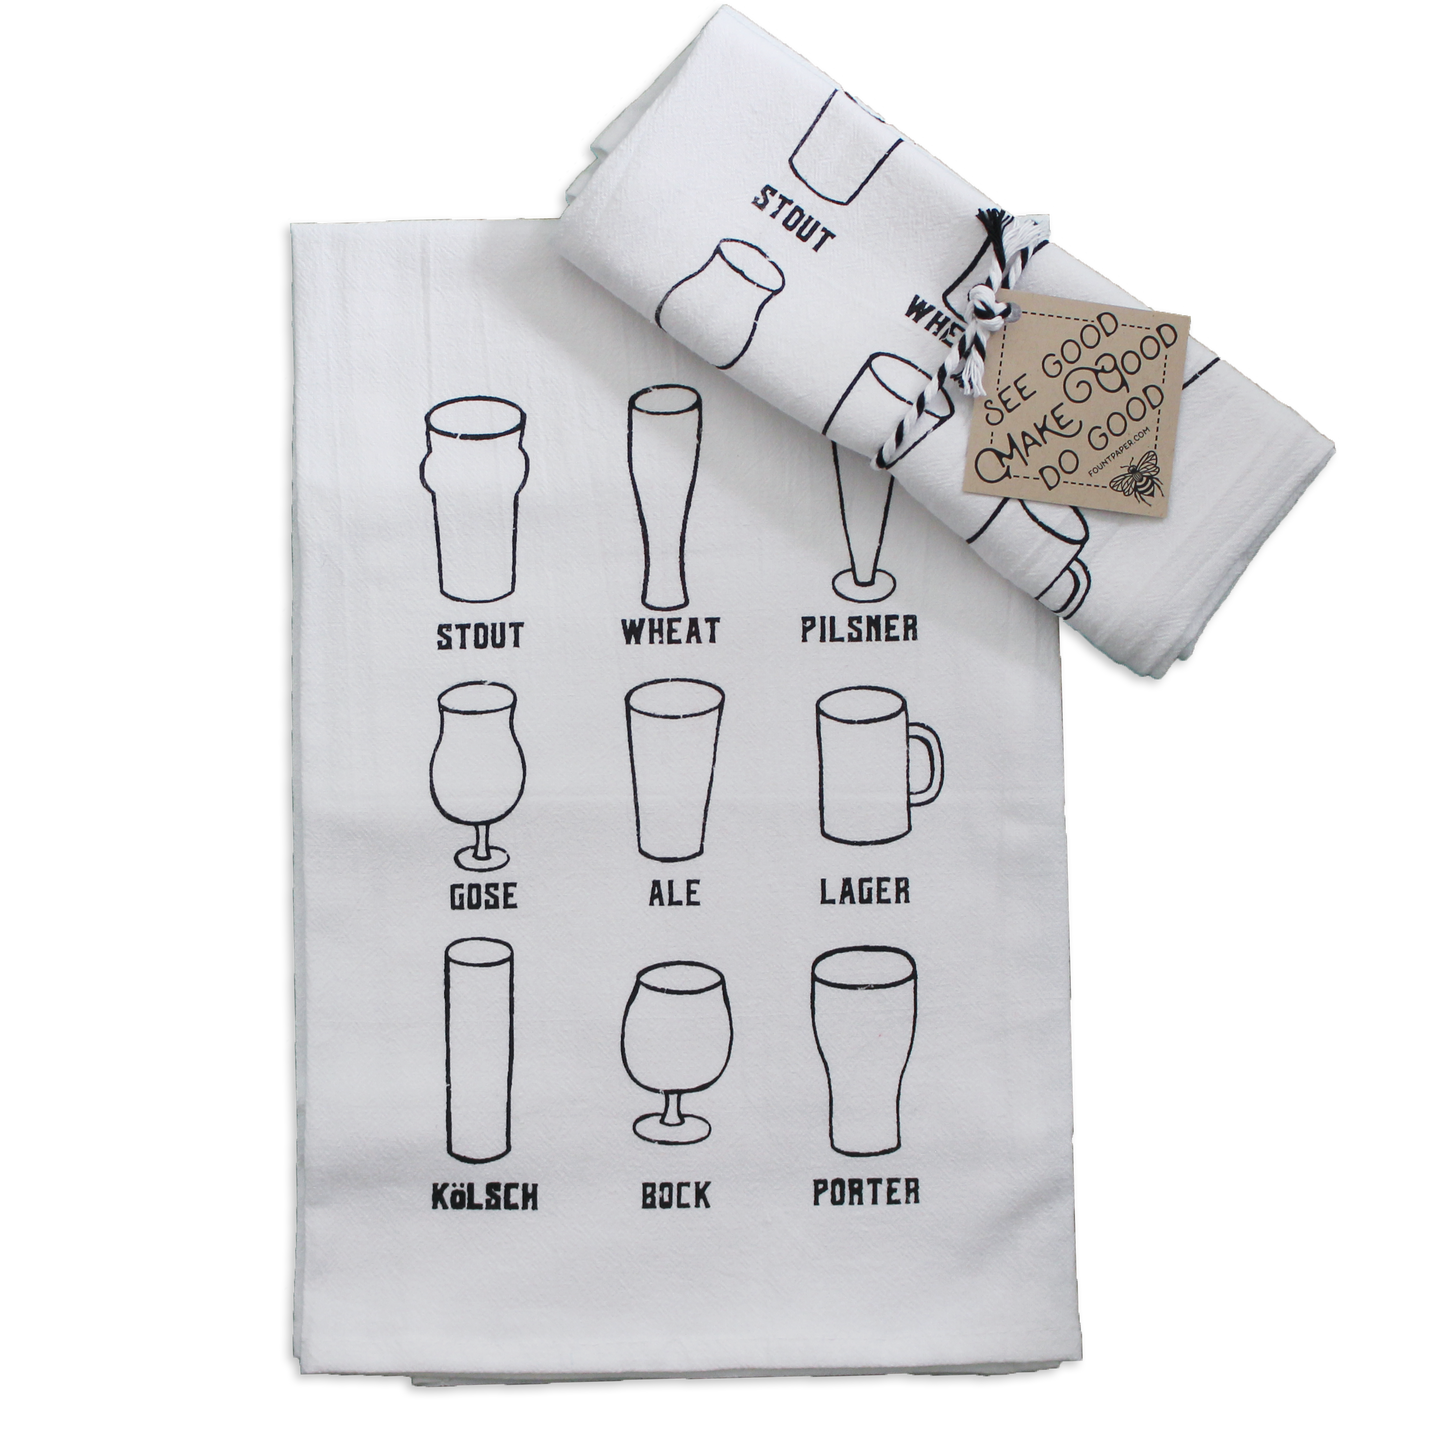 White kitchen towel wrapped in ribbon as a gift showing different beer mugs and types of beer to drink from